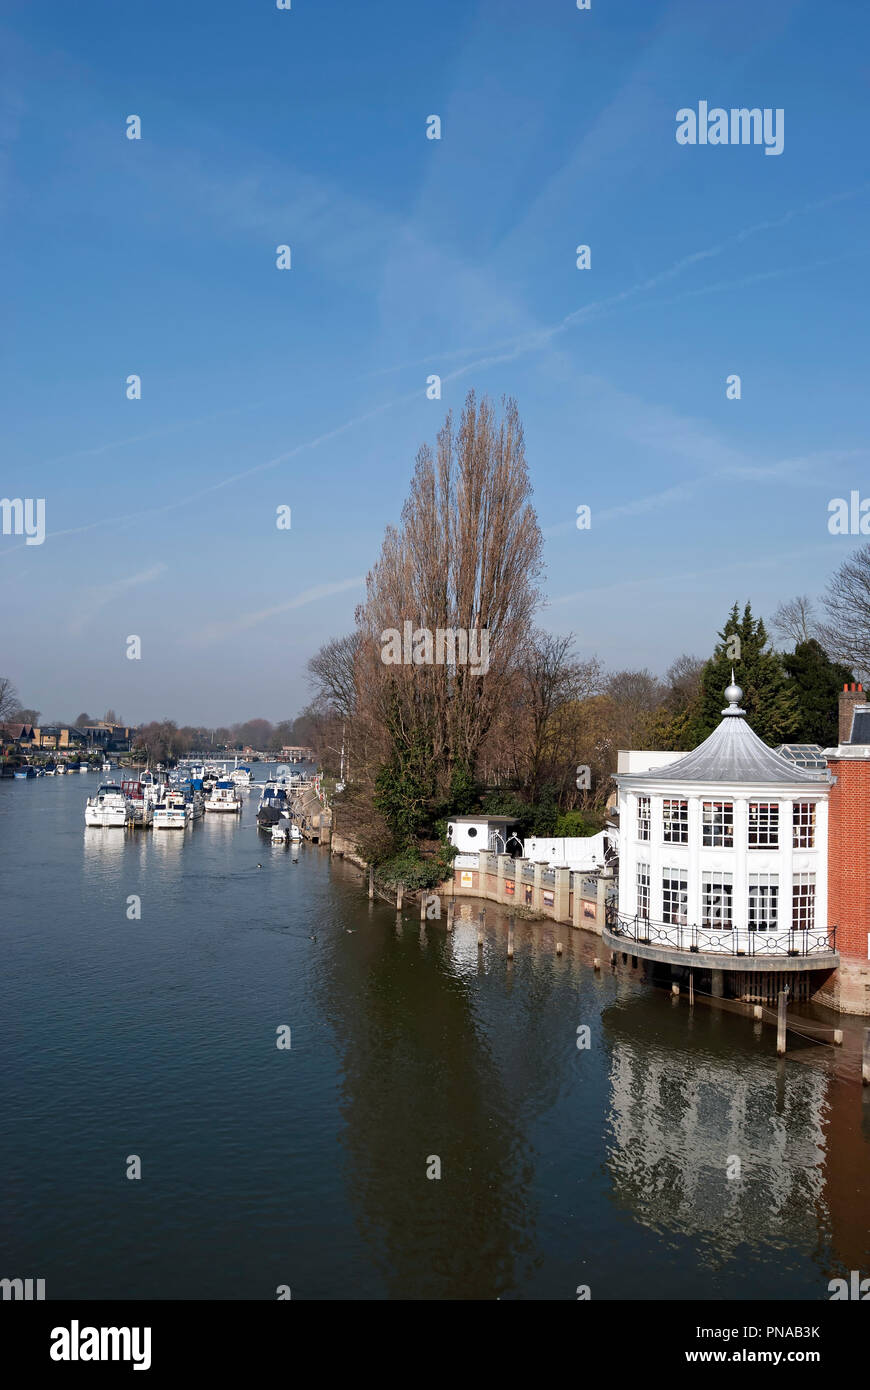 the river thames seen looking west from hampton court bridge, with the terrace bar of the mitre hotel to the right on the middlesex bank Stock Photo